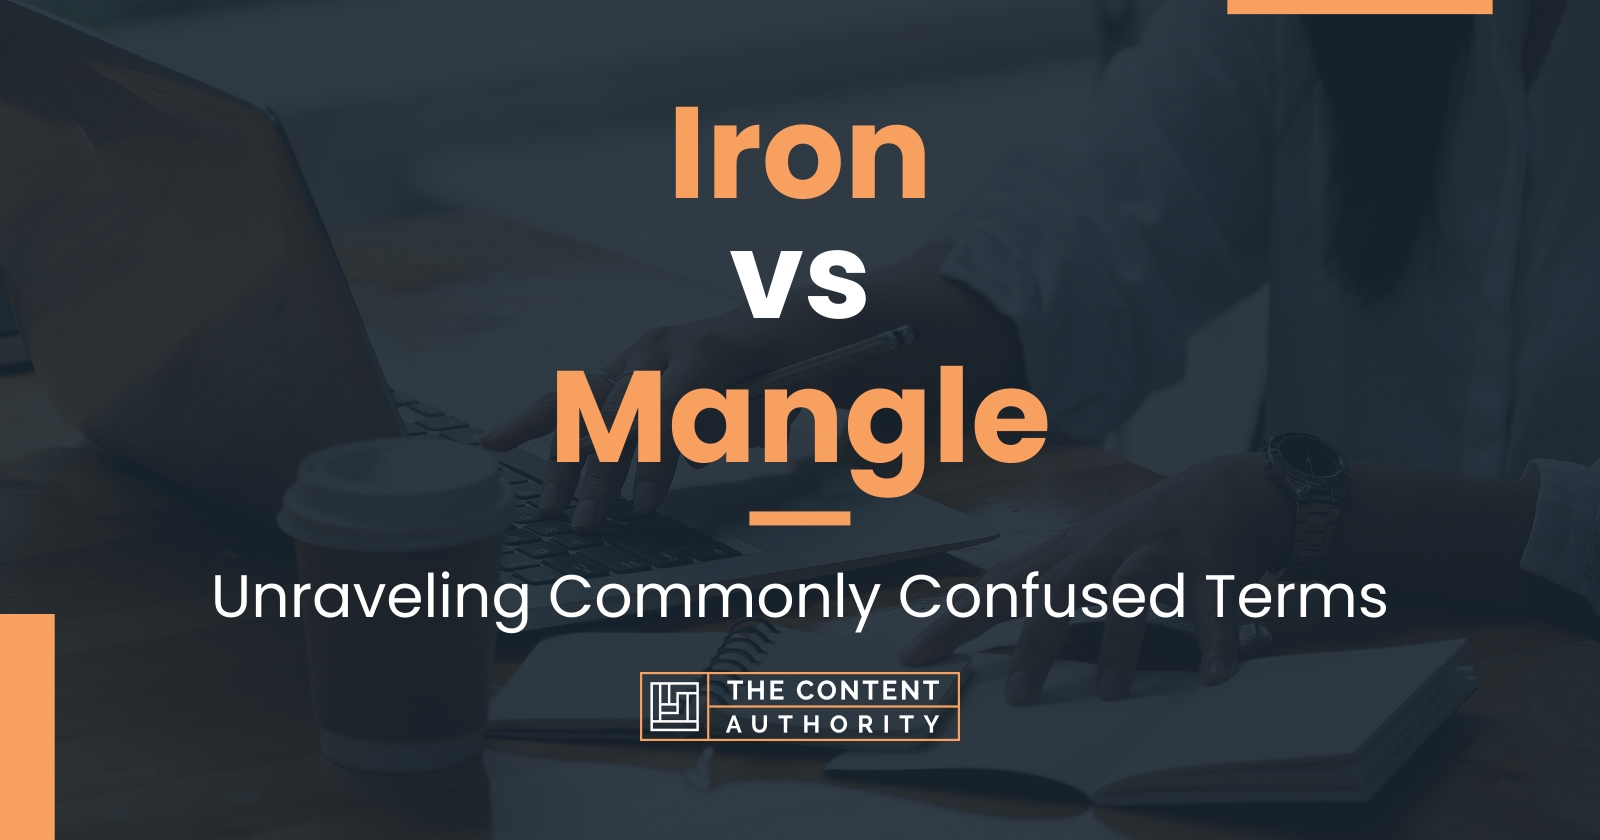 Iron vs Mangle: Unraveling Commonly Confused Terms